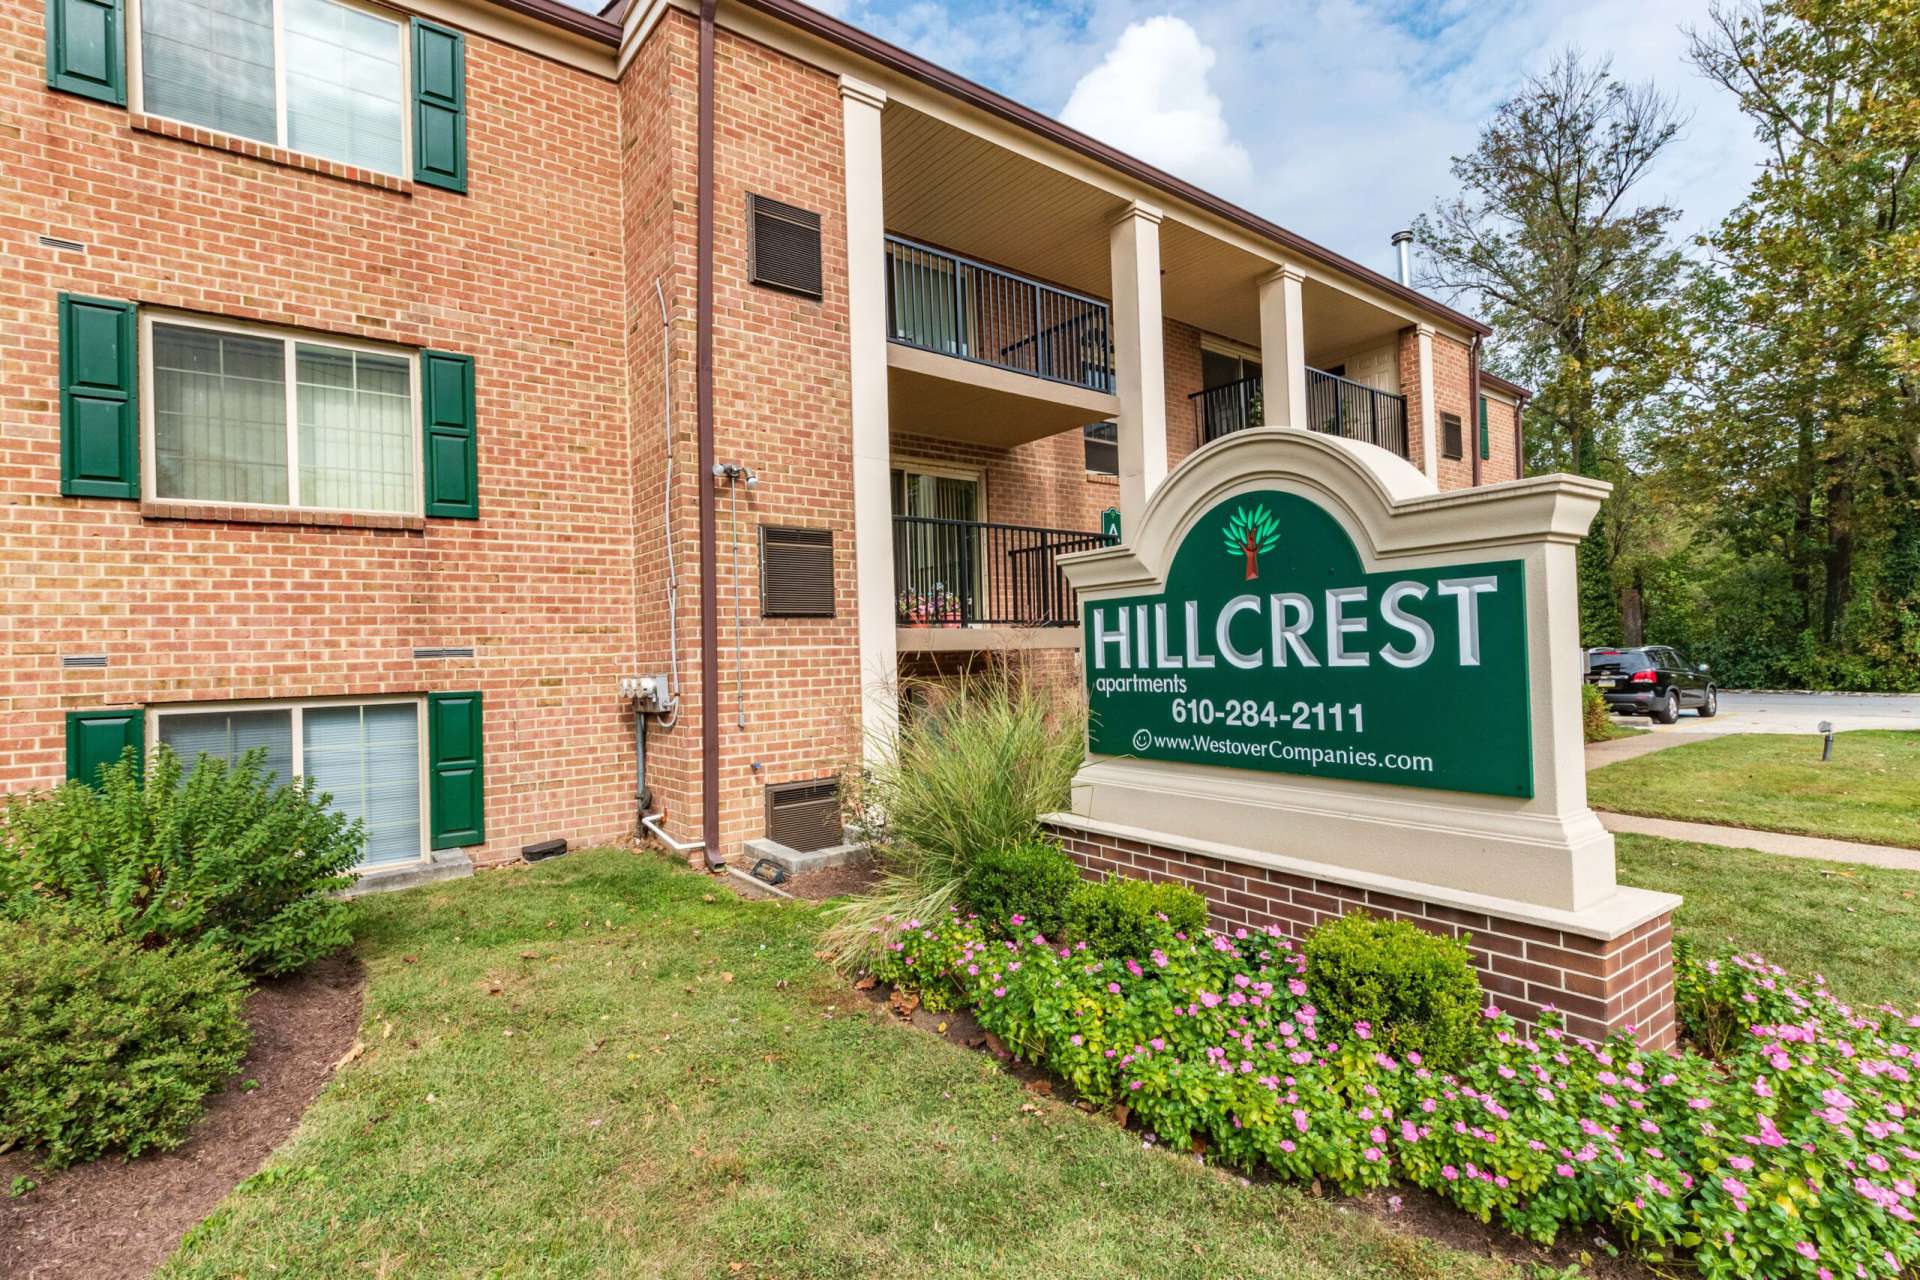 Hillcrest Apartments sign surrounded by flowers next to an apartment building.